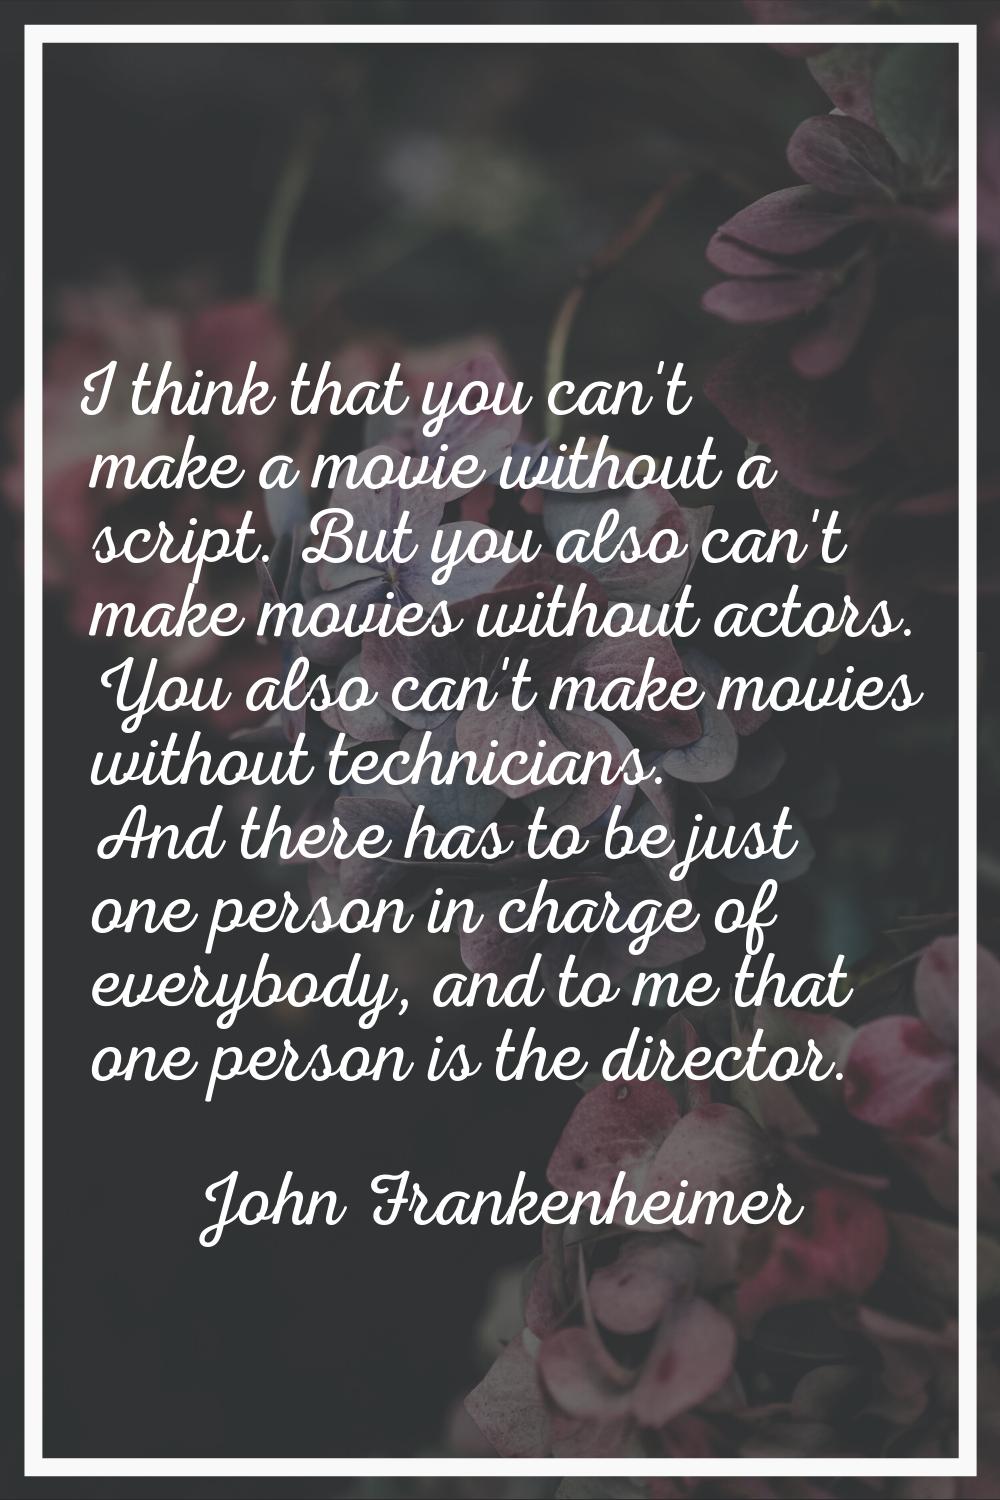 I think that you can't make a movie without a script. But you also can't make movies without actors